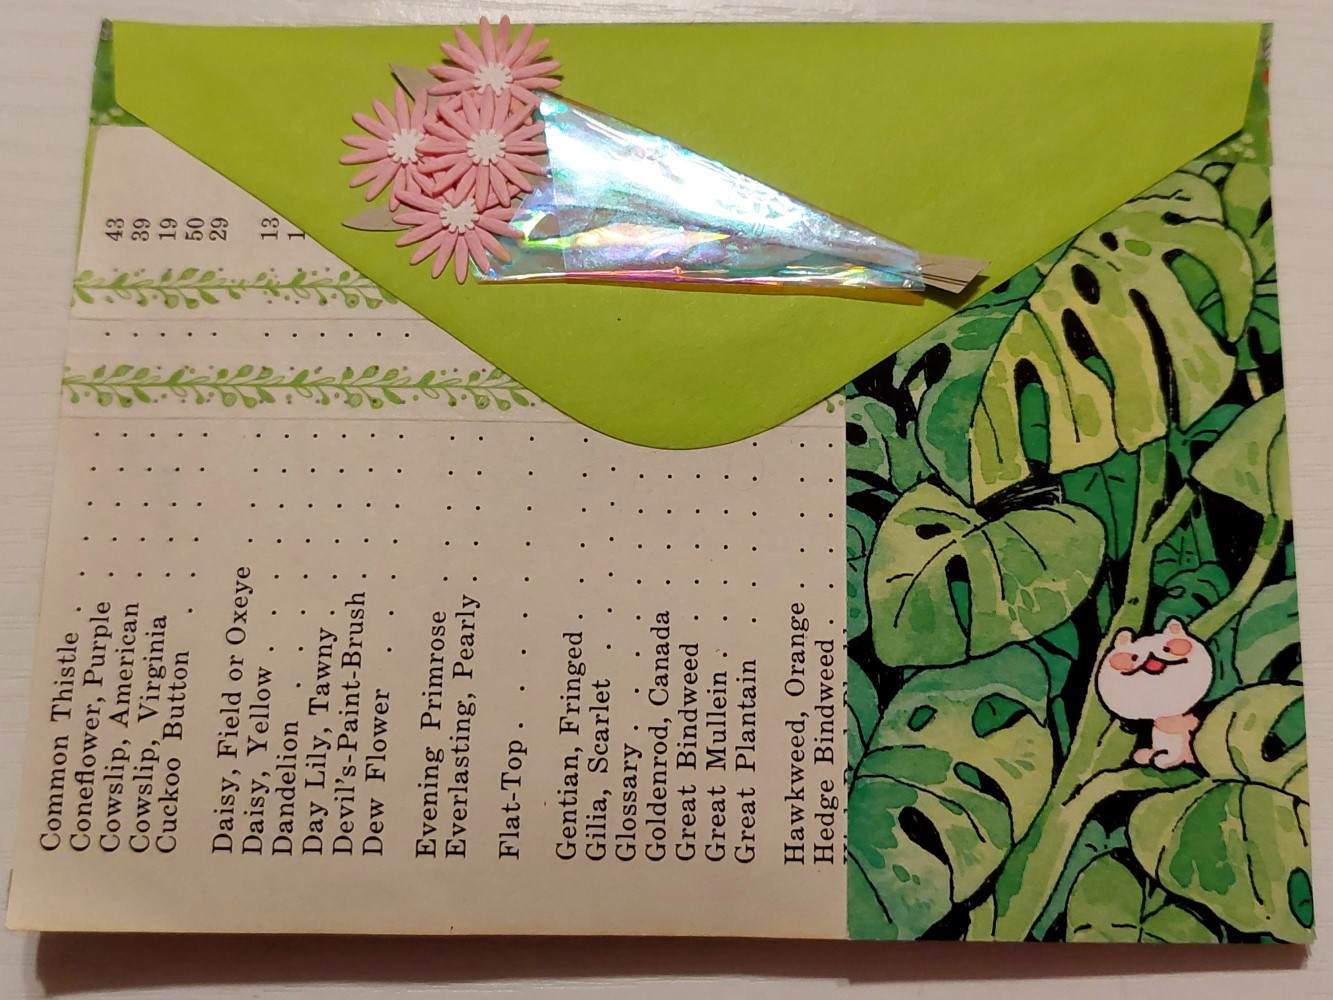 photo of the back of a bright green envelope. the envelope back has a small paper bouquet of flowers pasted onto the envelope flap. there is a page from the directory of a vintage book of flowers turned ninety degrees that is covering half of the bottom of the envelope. the other half has an illustration of monstera leaves and a small white creature sitting on a leaf and smiling at the viewer.